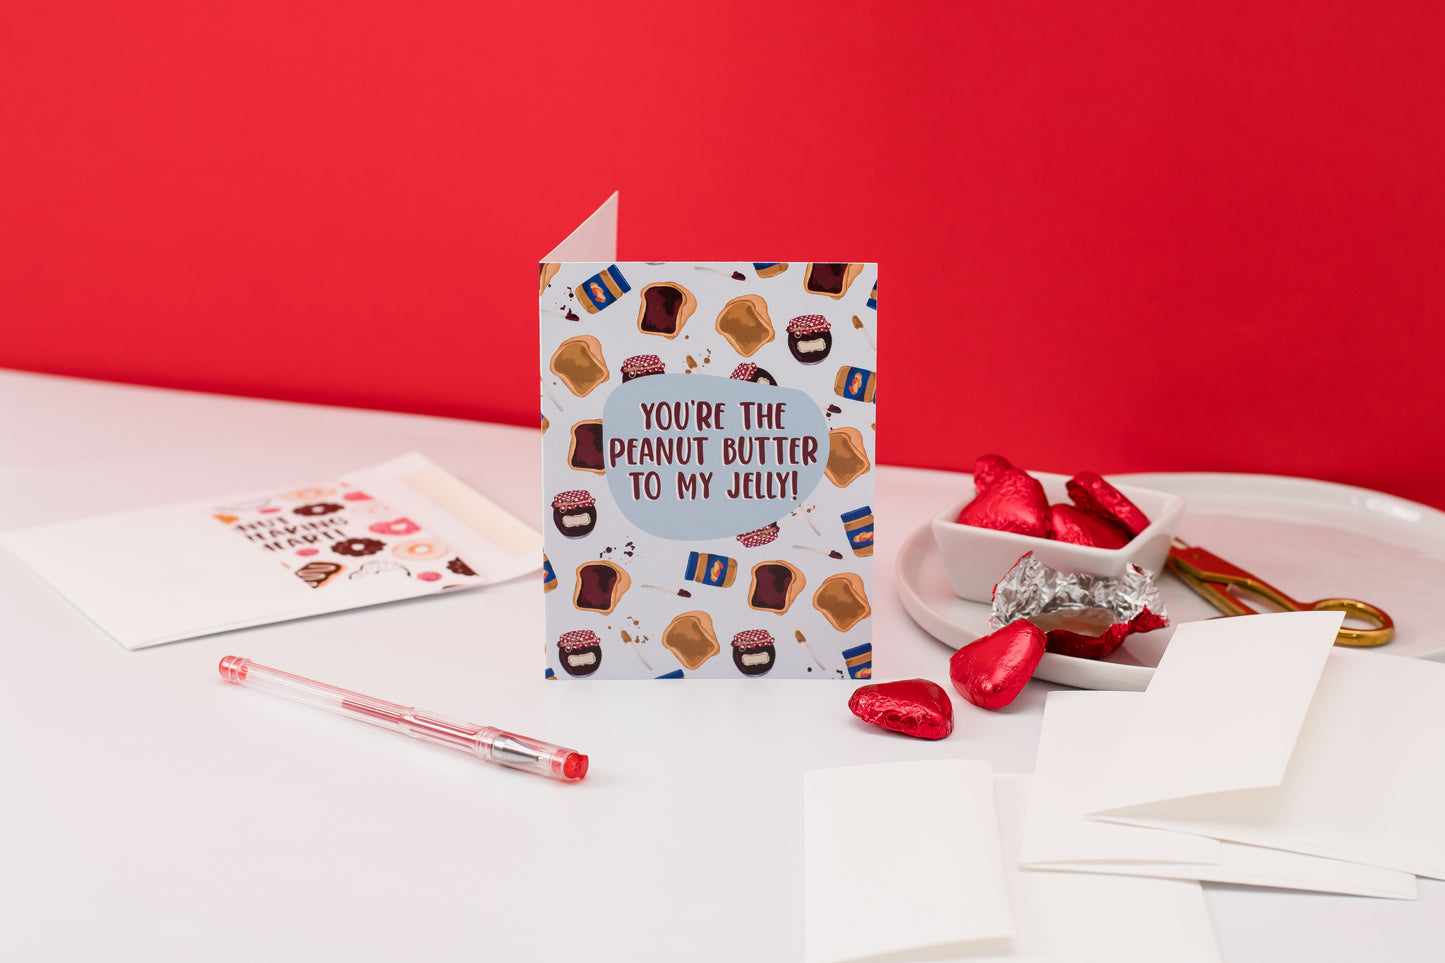 You're The Peanut Butter To My Jelly - Greeting Card